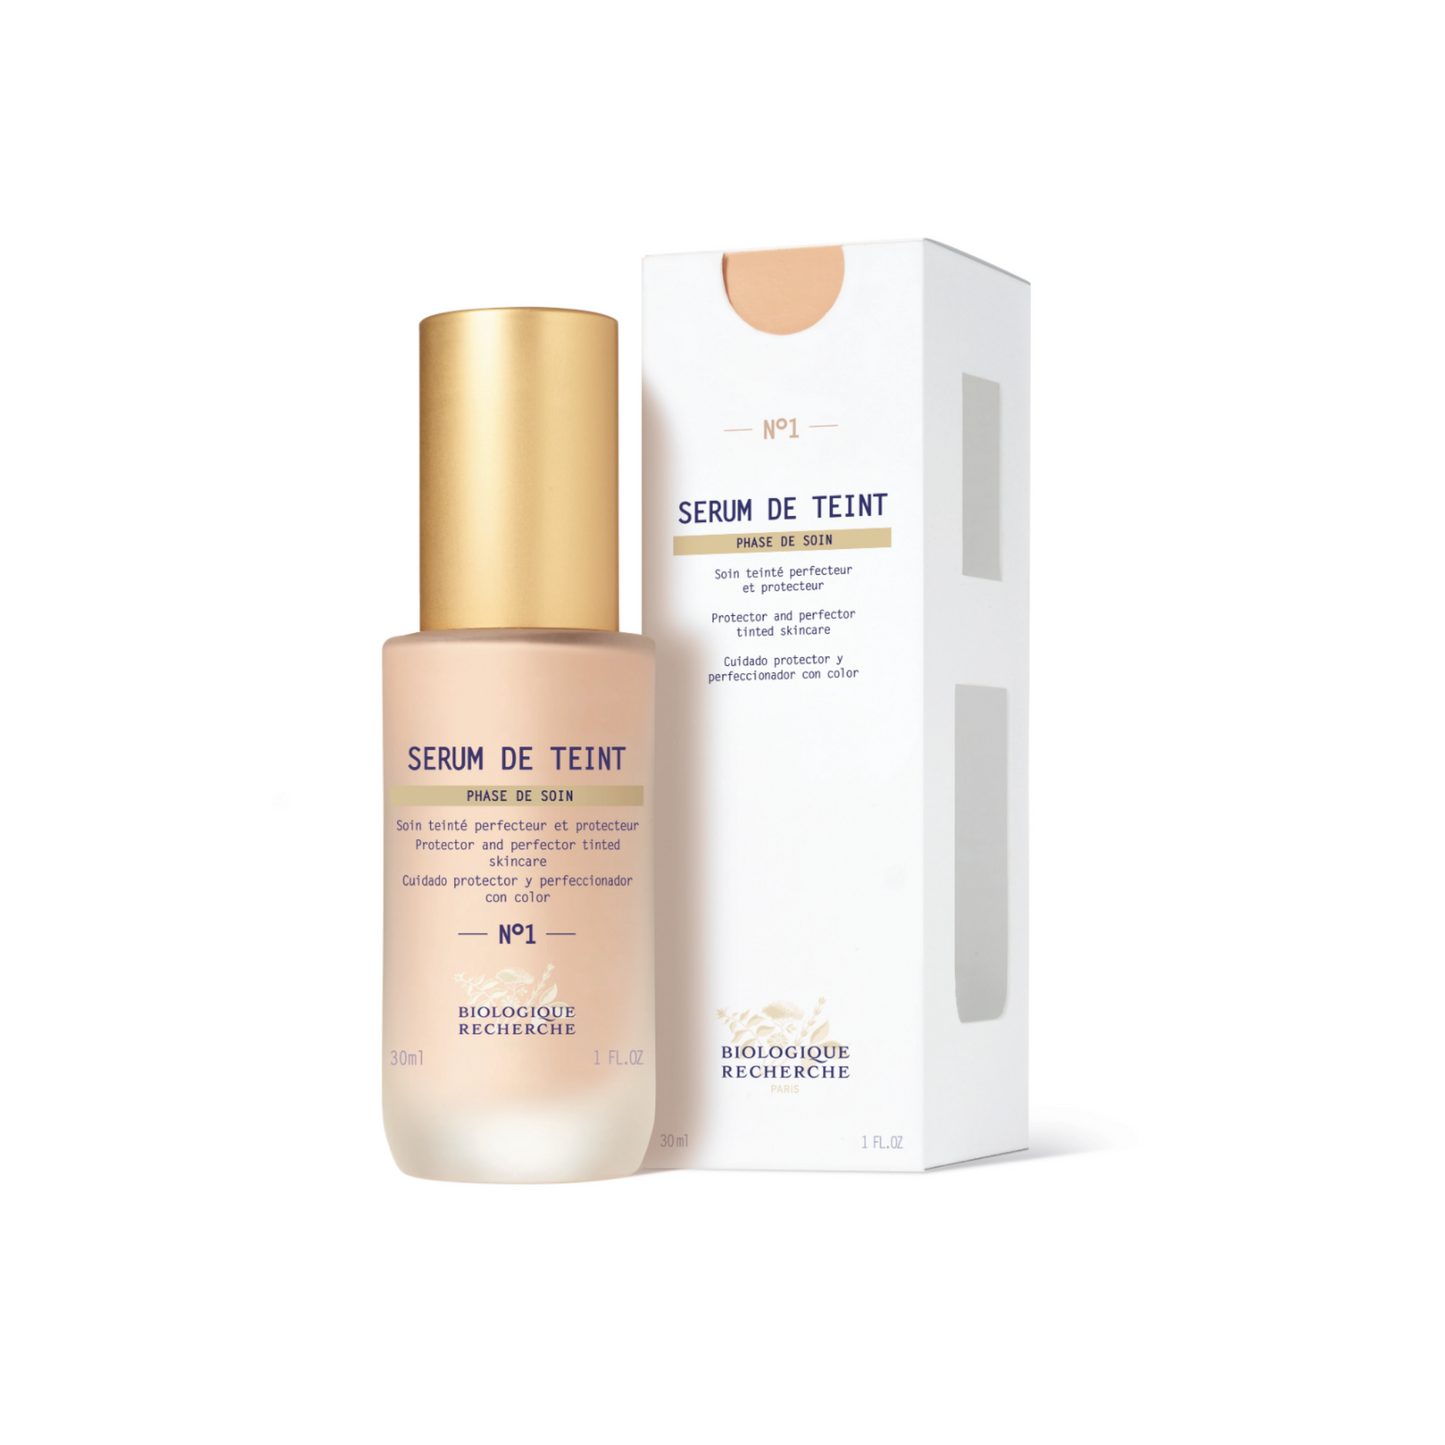 Serum de Teint: Perfecting and Protecting Tinted Skincare